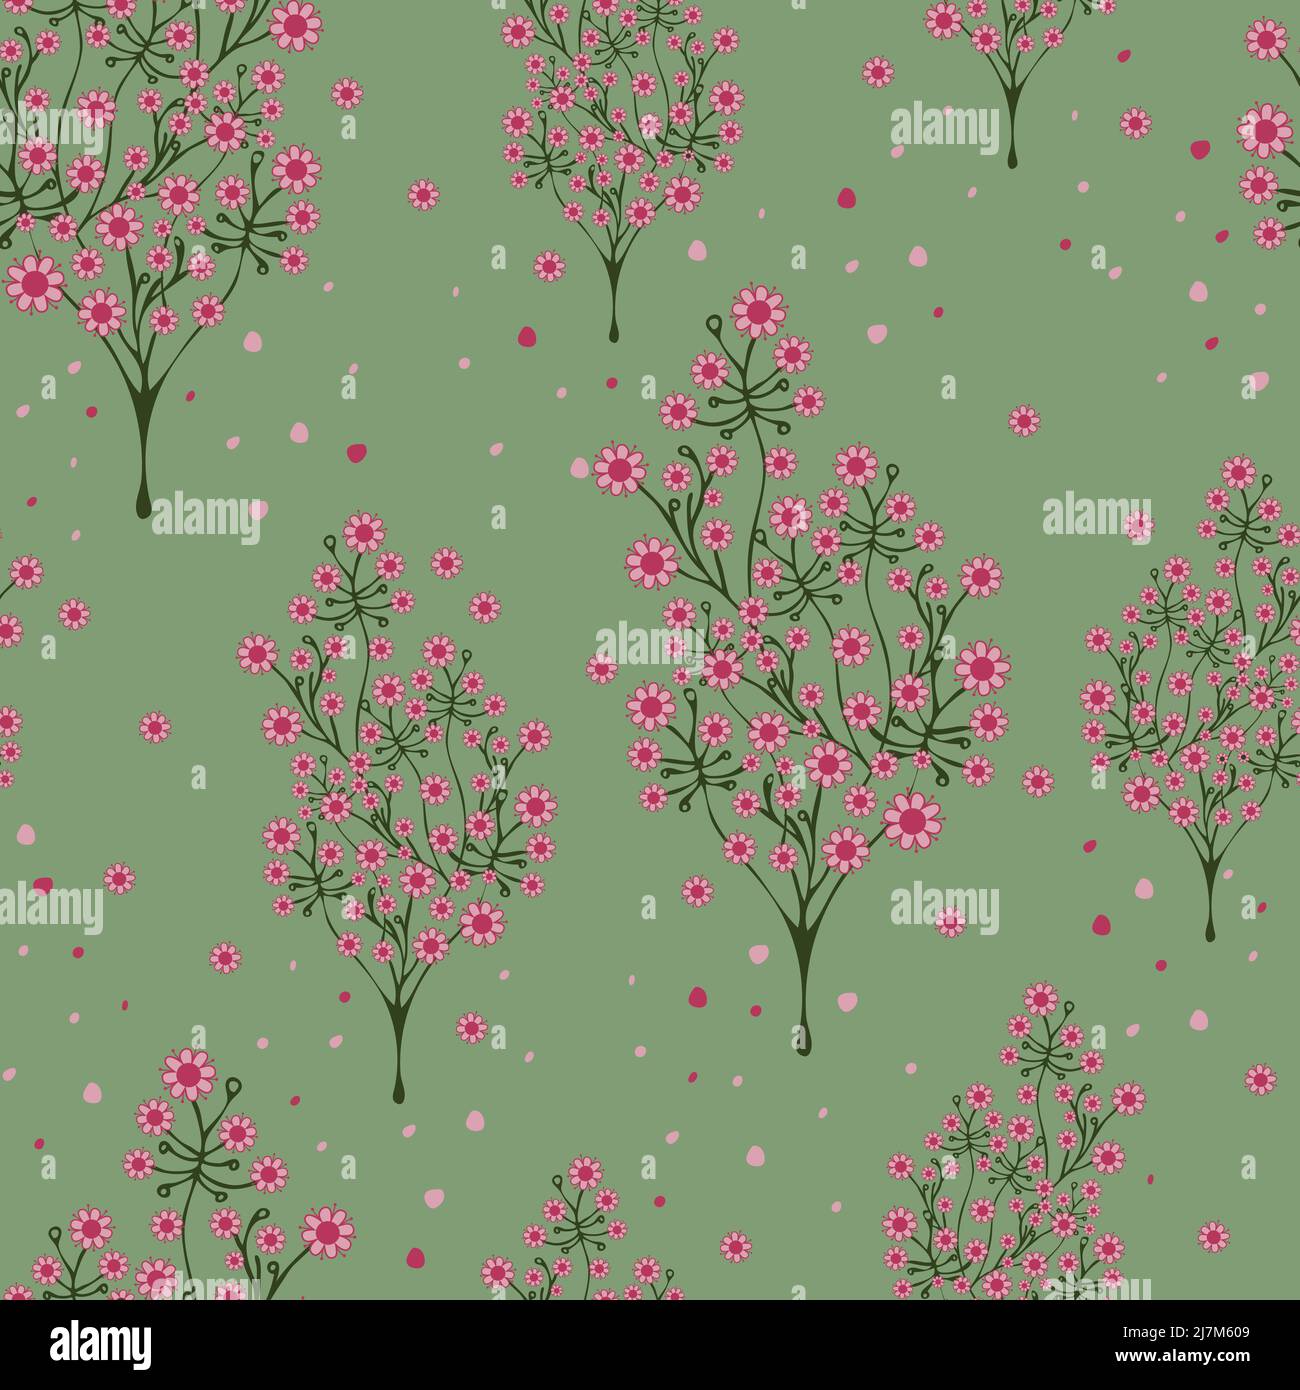 Seamless vector pattern with cherry blossom tree on green background. Beautiful flower forest wallpaper design. Stock Vector